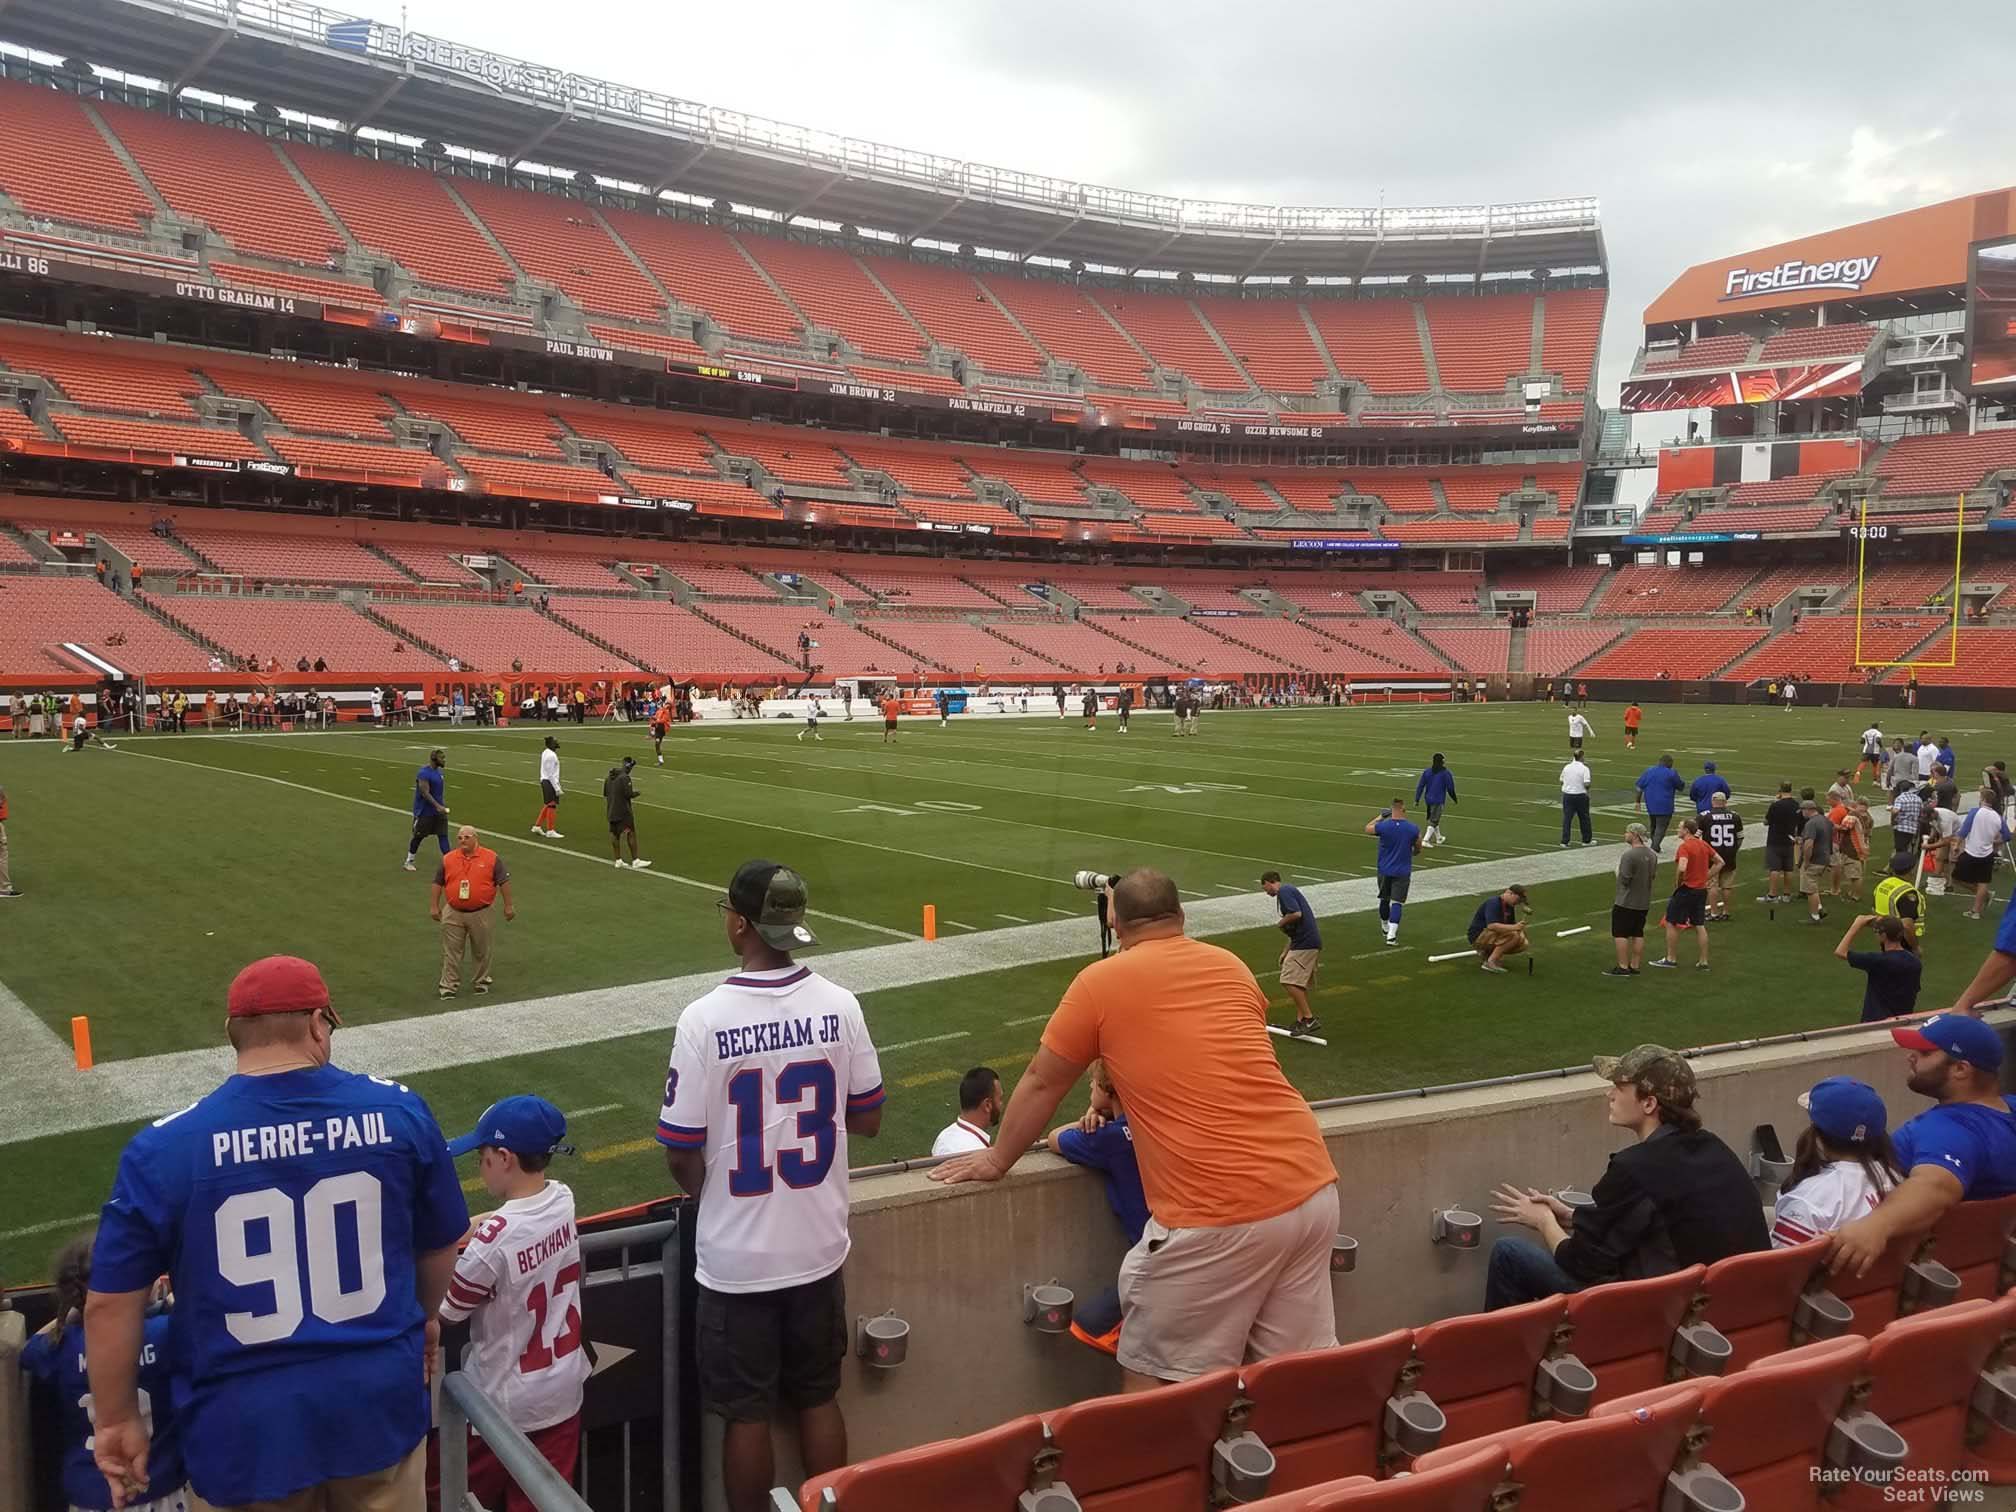 section 102, row 2 seat view  - cleveland browns stadium